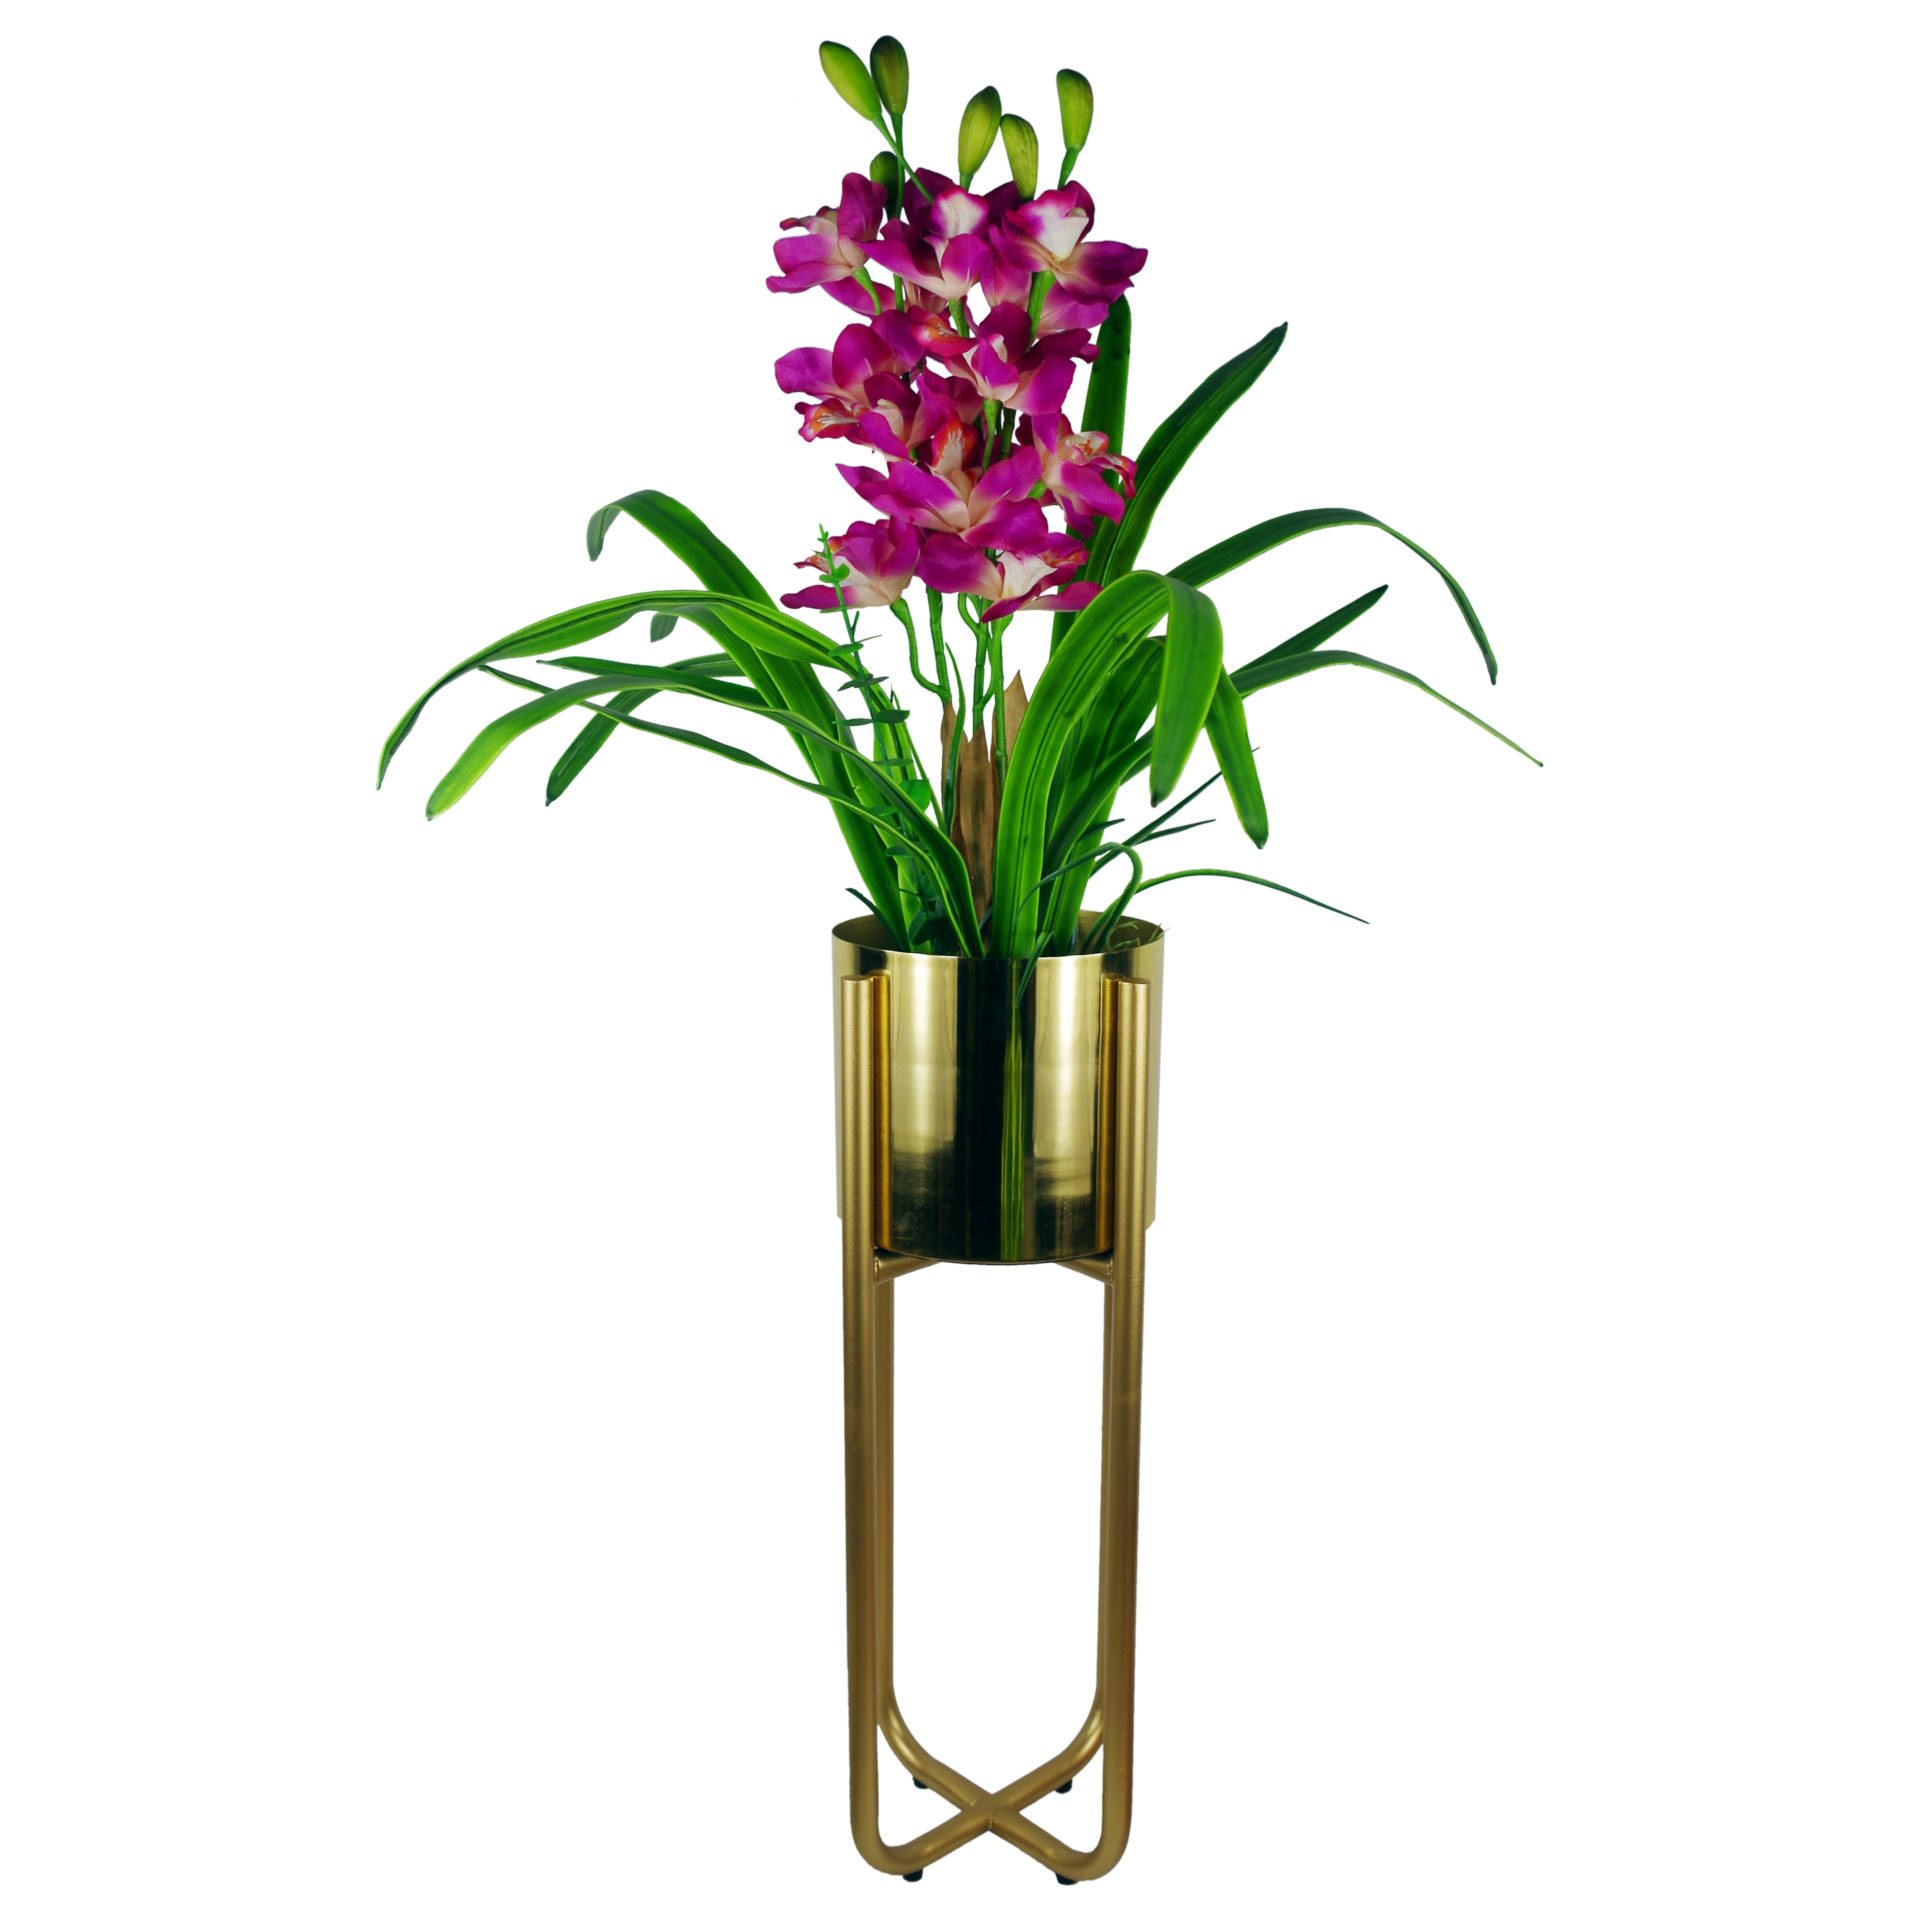 Planter not included 62cm x 18cm LEAF-7394-STAND-ONLY Large Gold Planter Stand 